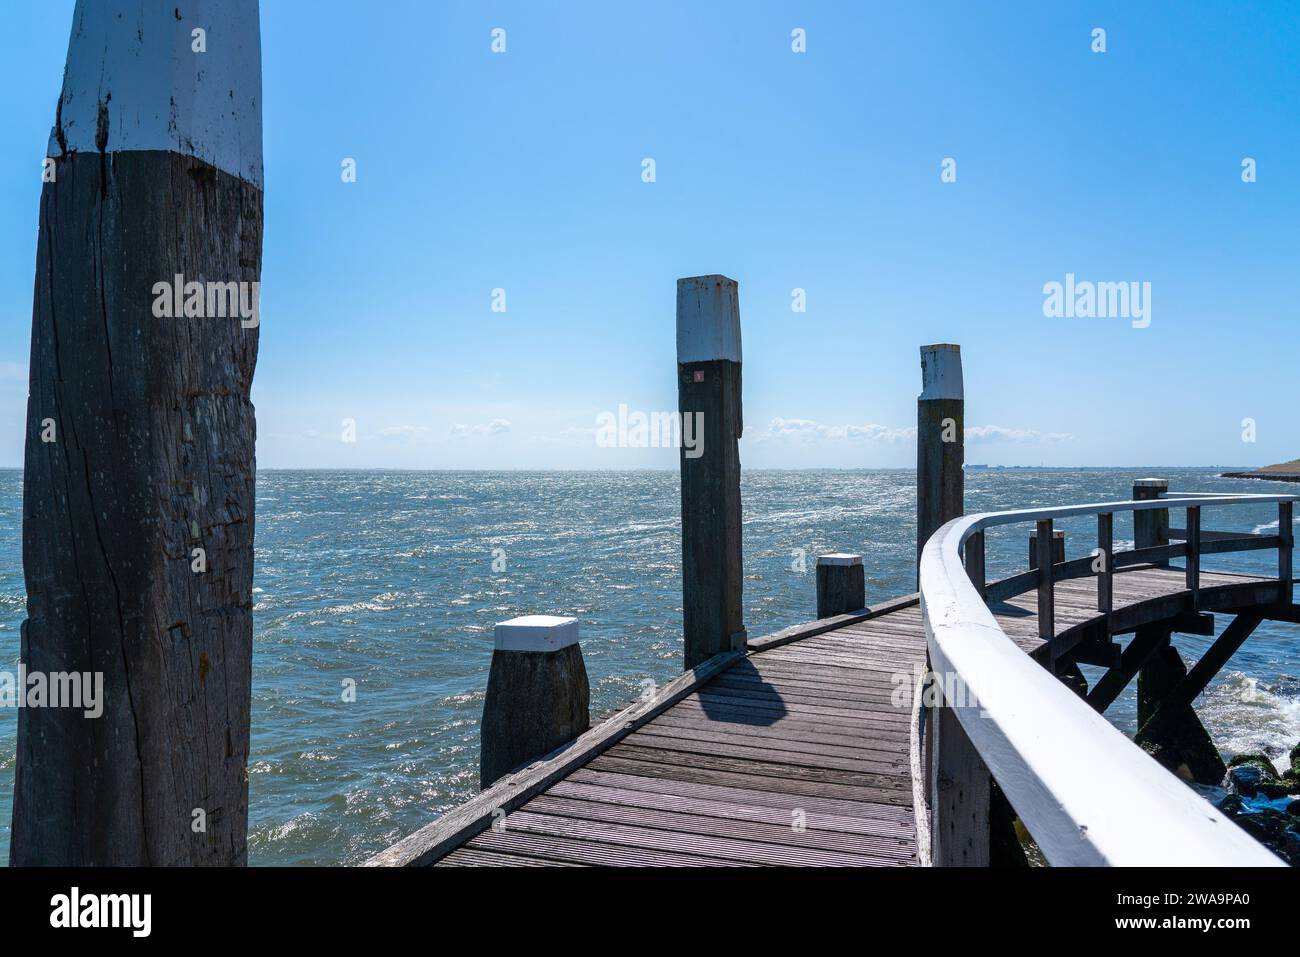 On a beautiful day at the see is whit a pier for ships Stock Photo